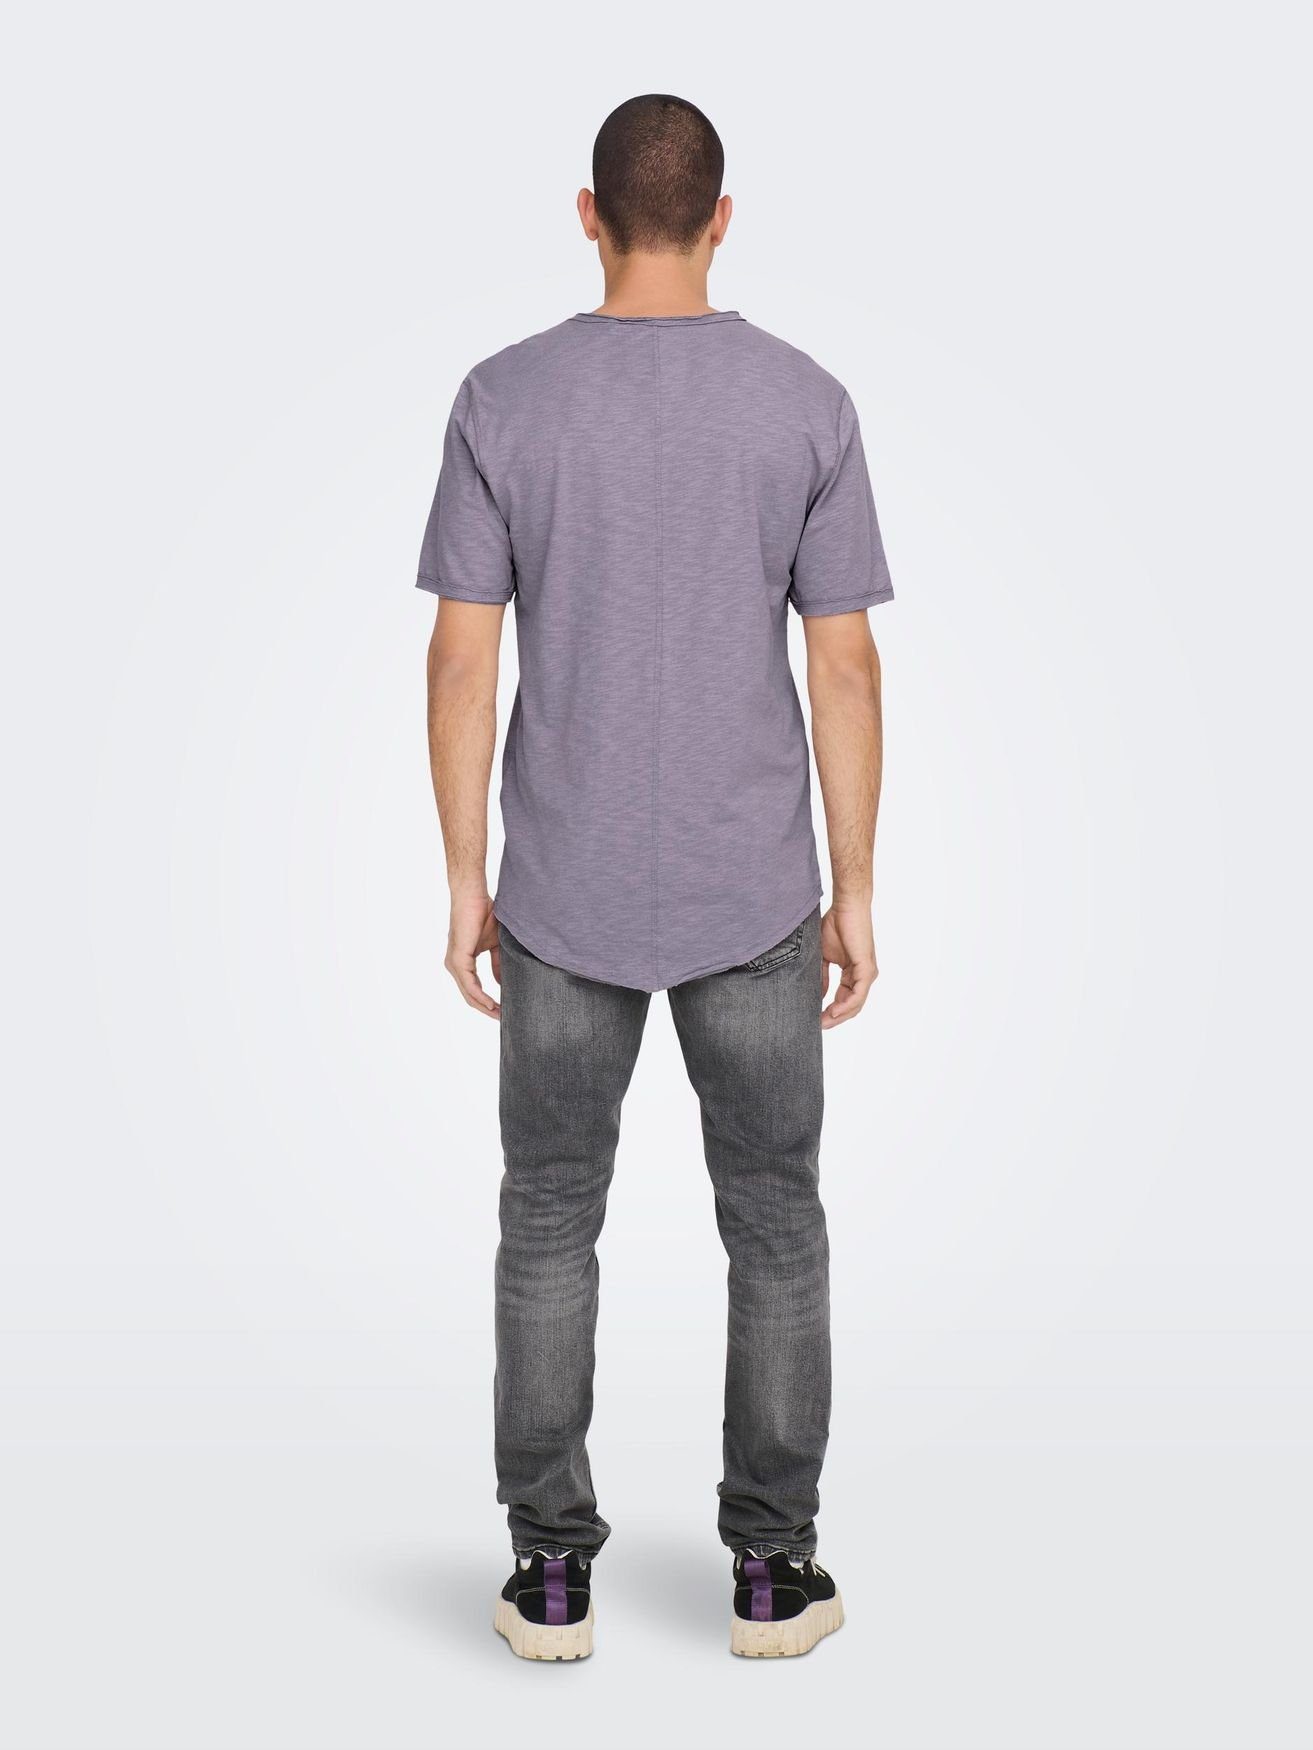 ONLY & SONS Kurzarm in T-Shirt ONSBENNE Langes Einfarbiges Basic 4783 Rundhals Lila Shirt T-Shirt